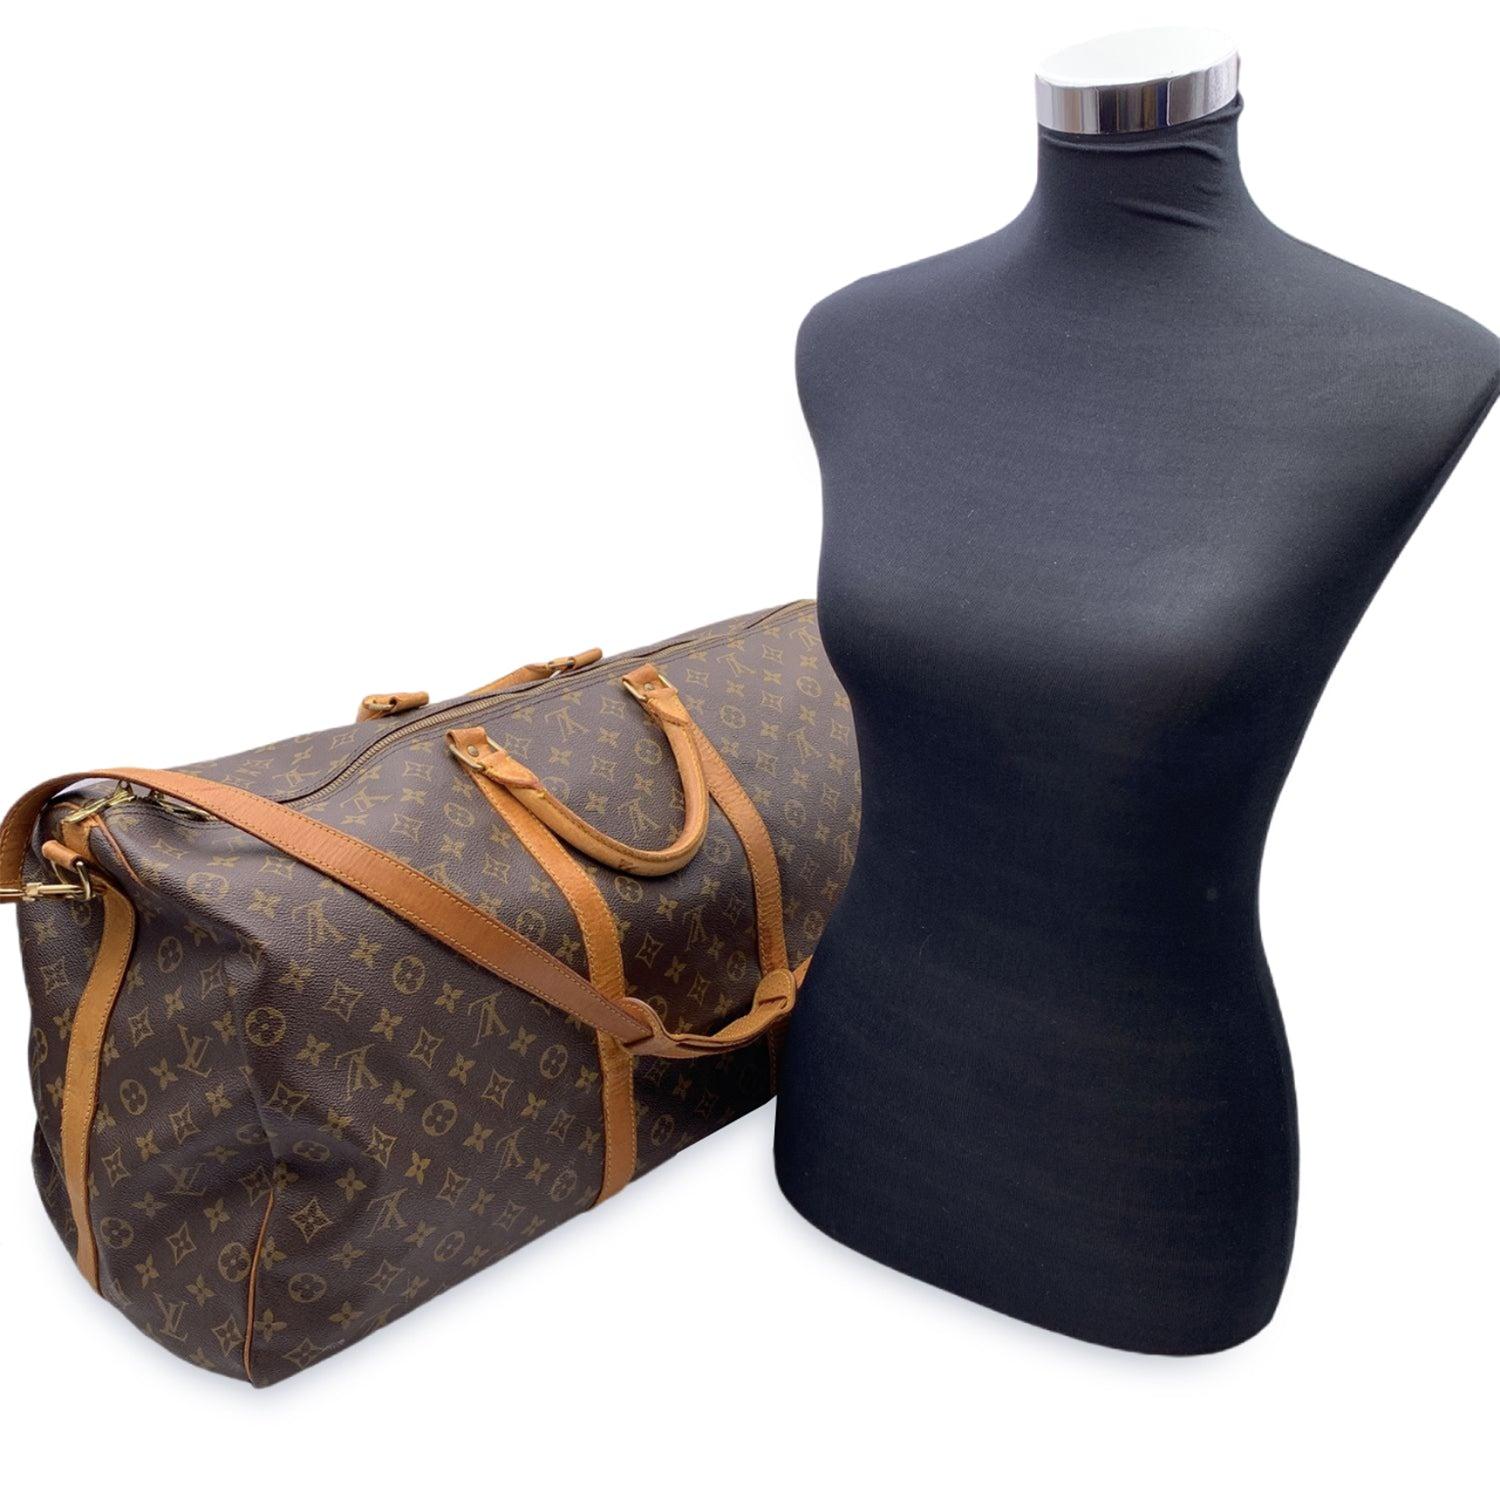 This beautiful Bag will come with a Certificate of Authenticity provided by Entrupy. The certificate will be provided at no further cost. Vintage Louis Vuitton 'Keepall Bandouliere 60' Travel bag. Monogram canvas and beige leather trim. Double zip